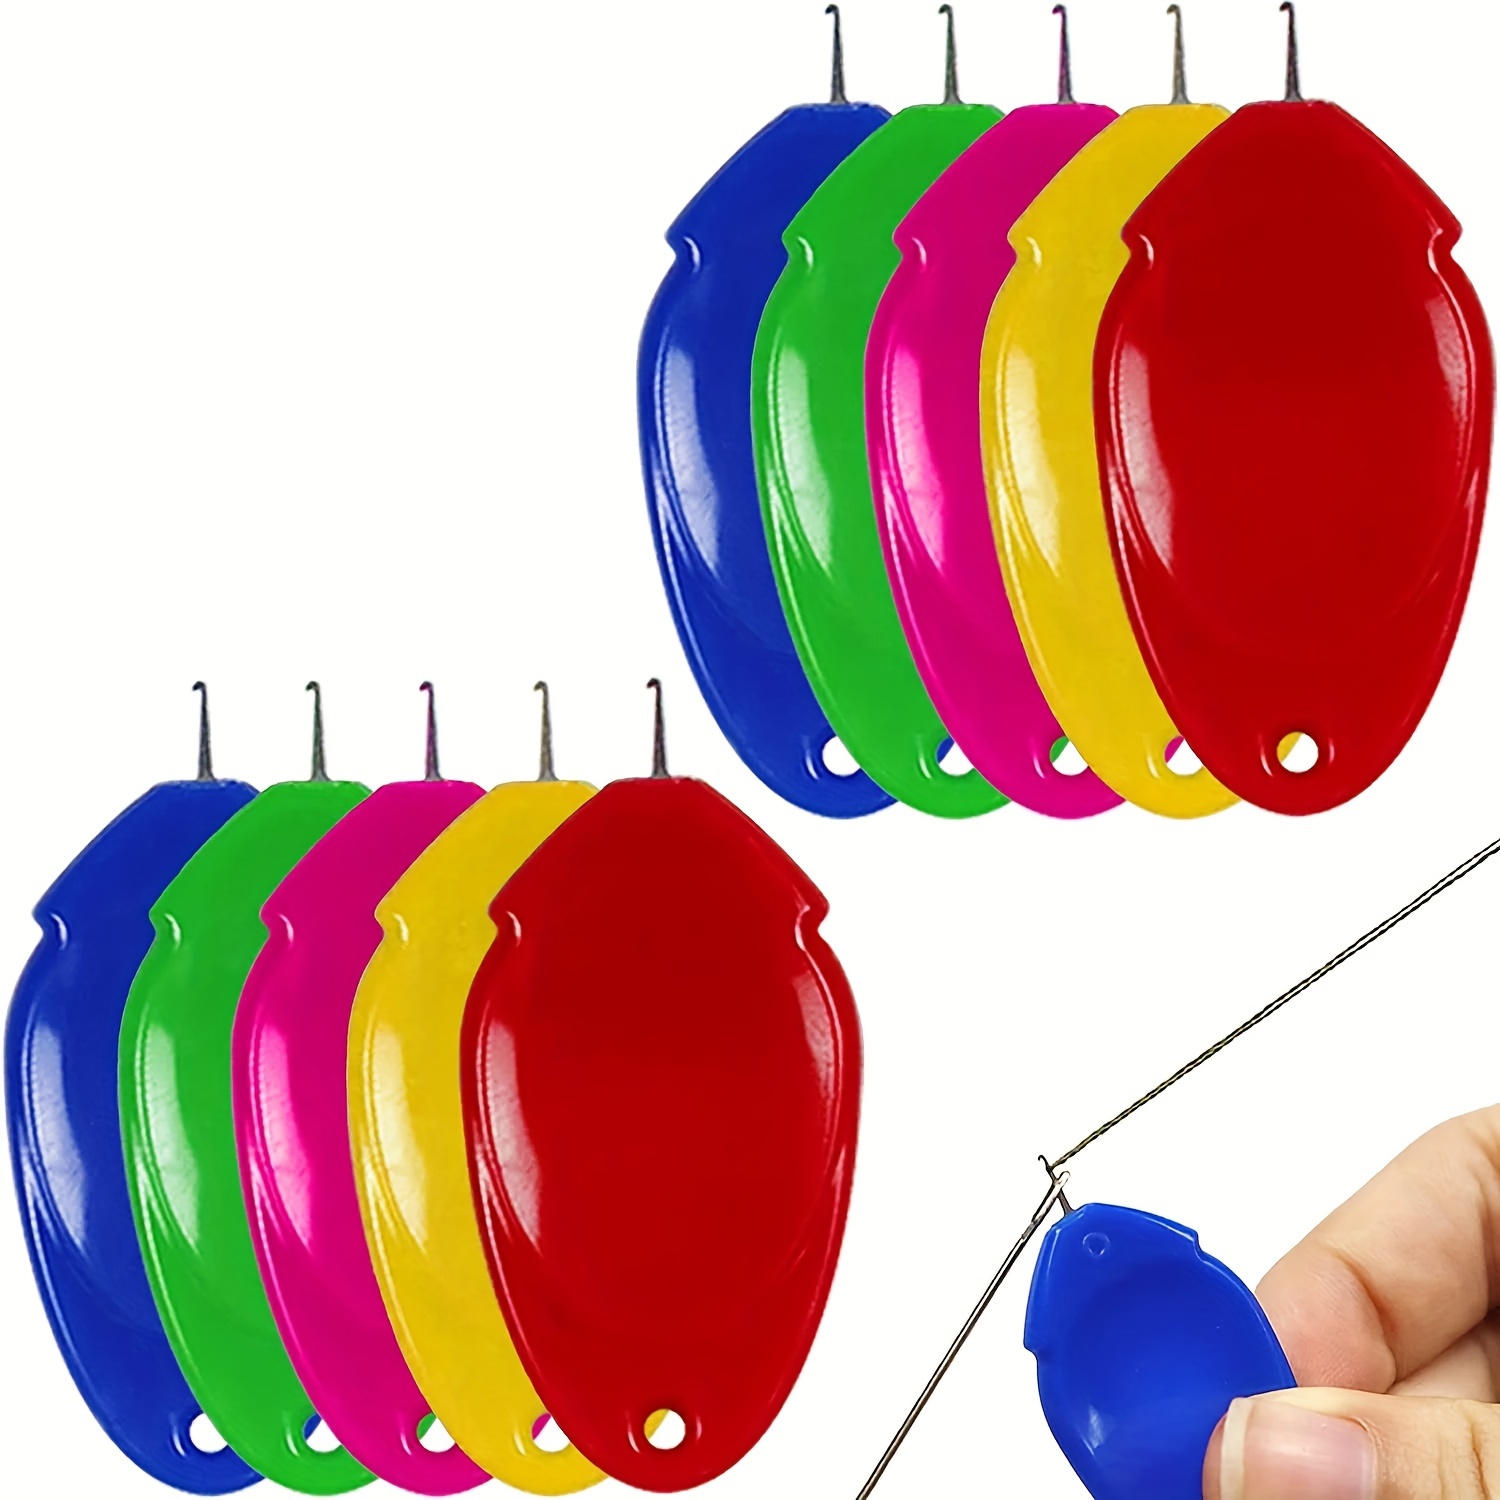 

6pcs Colorful Oval Shaped Needle Threaders, Diy Needle Threader Sewing Tool For Sewing Crafting, Knitting Craft, Quilting